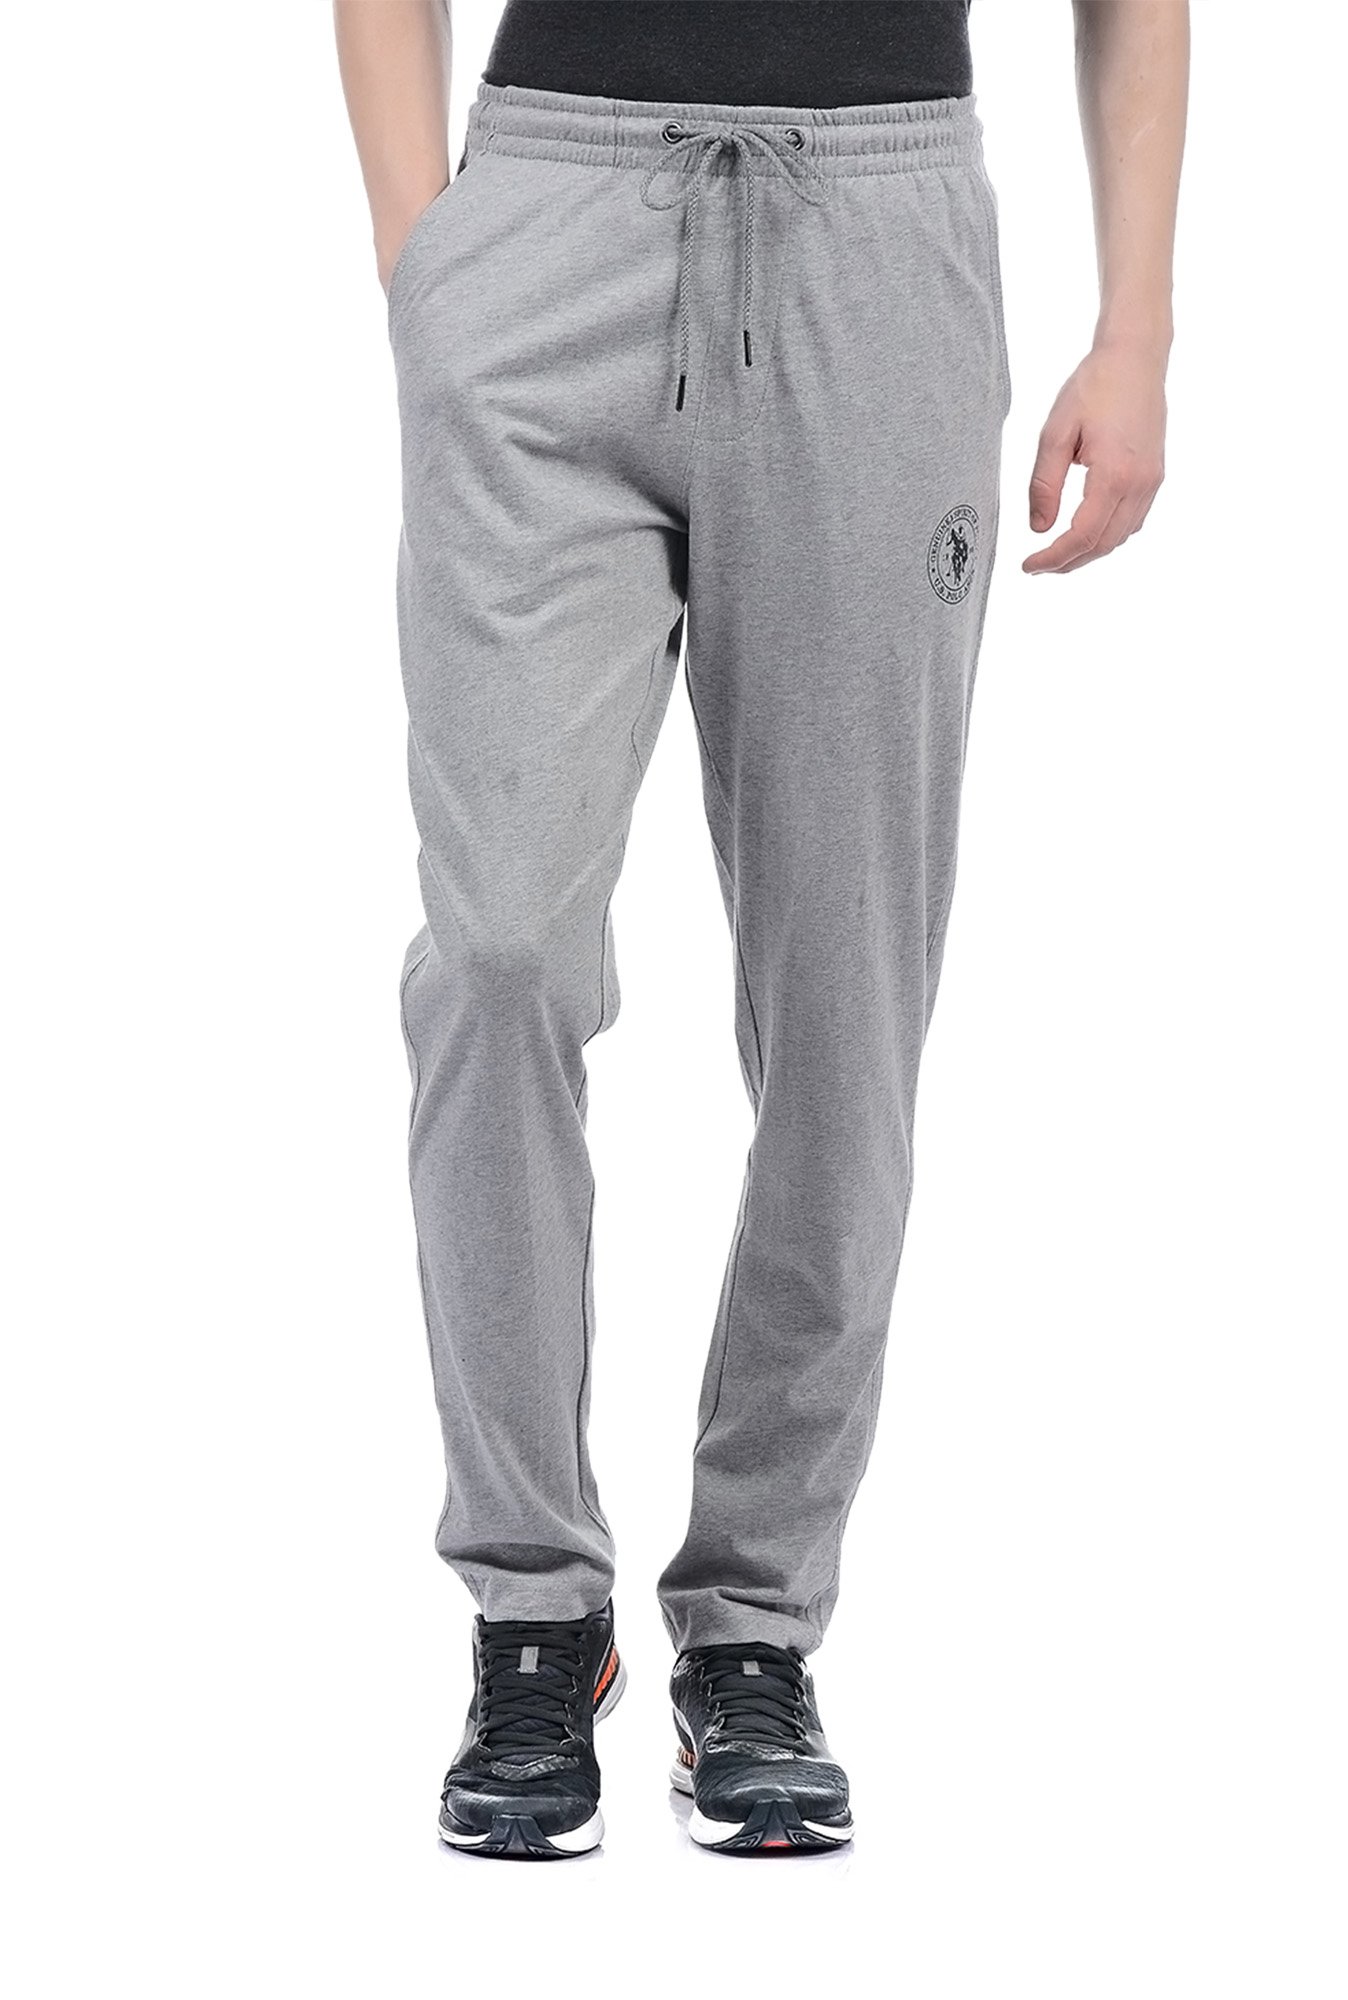 US Polo Mens Comfort Fit Heathered Track Pants